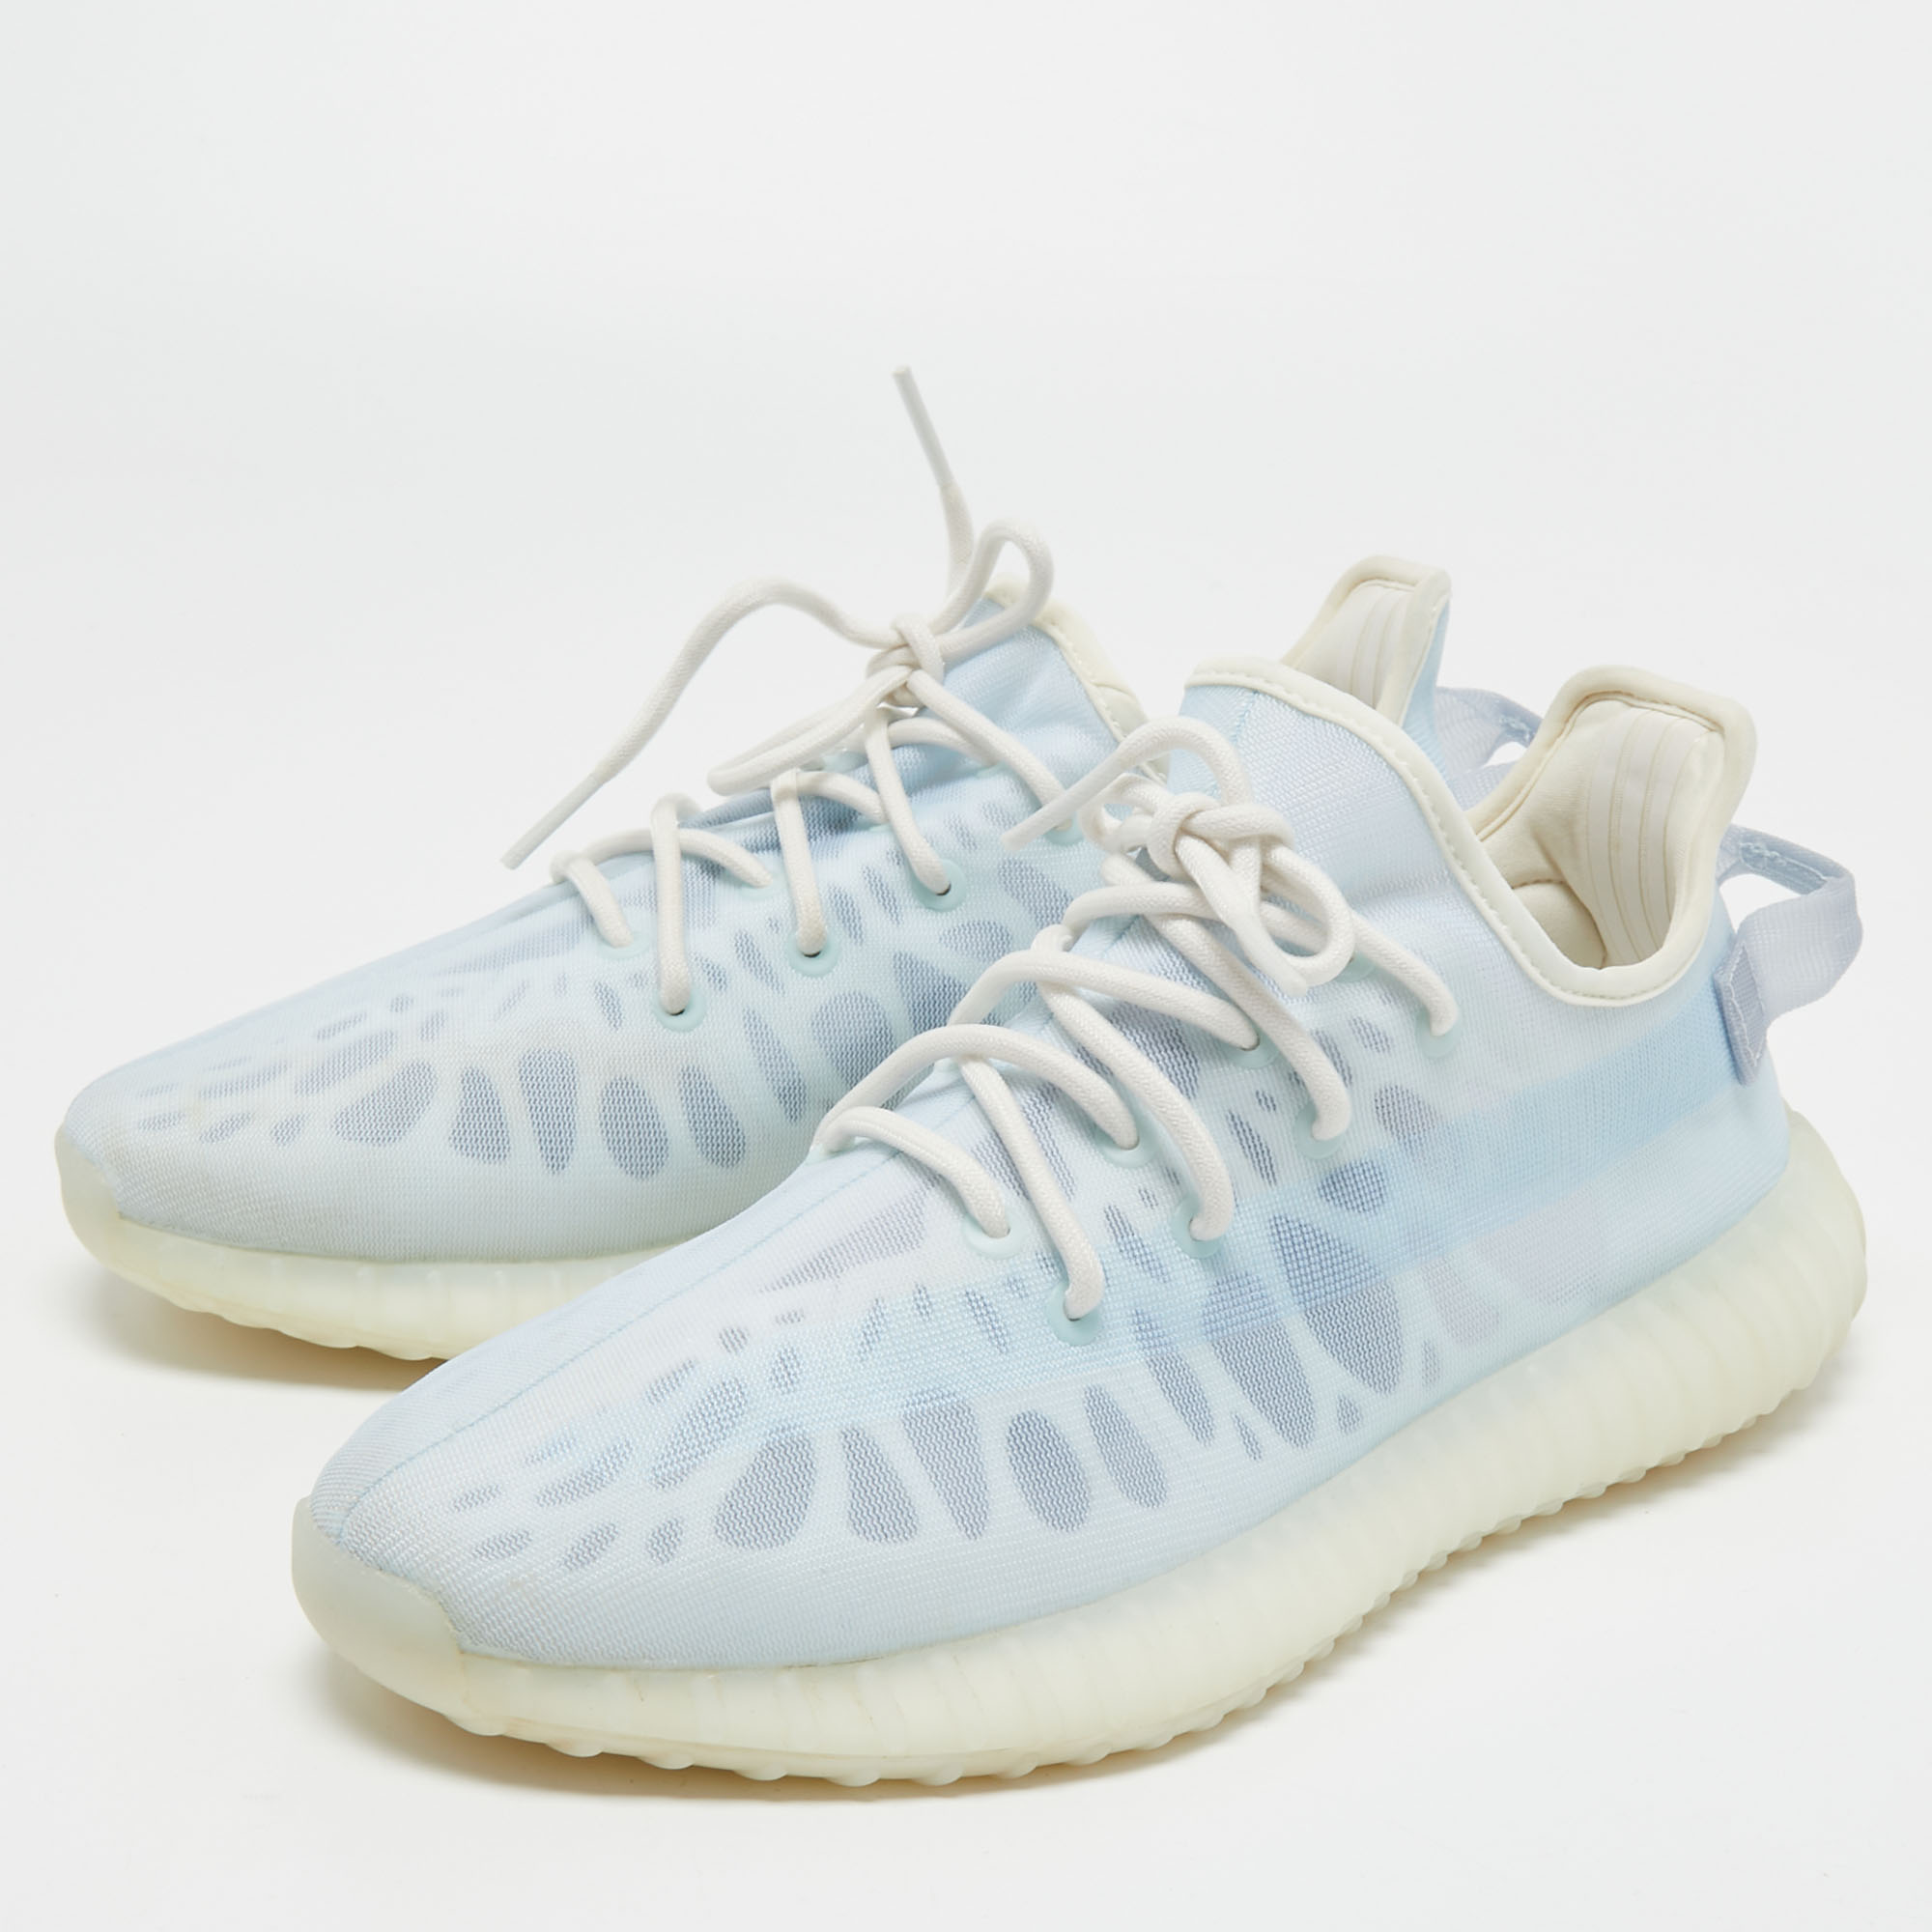 

Yeezy x Adidas Light Blue Mesh Boost 350 V2 Mono Ice Sneakers Size  1/3